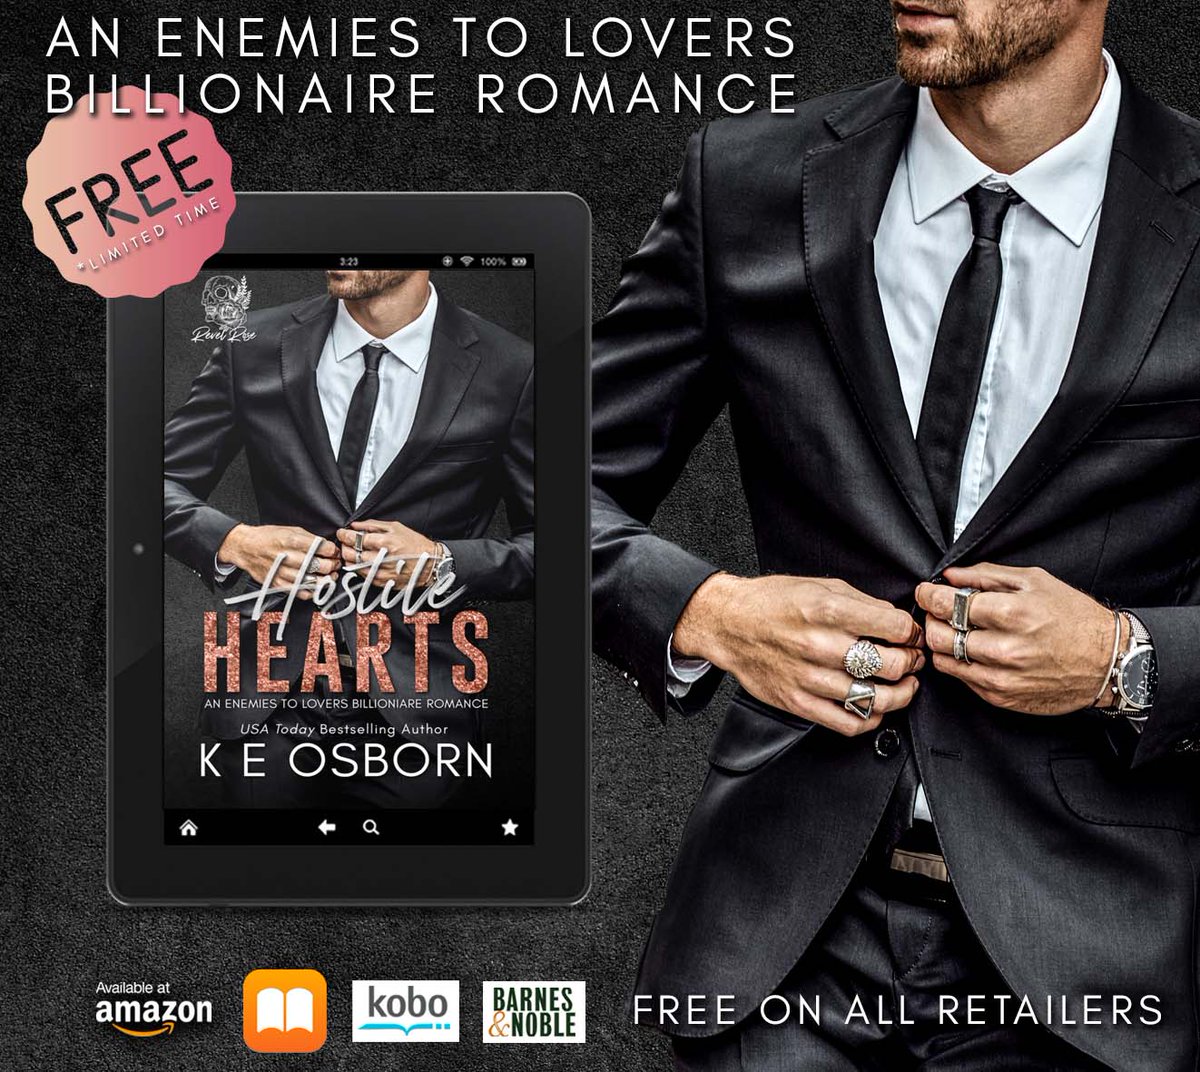 🖤 FREEBIE 🖤 HOSTILE HEARTS by @KEOsbornAuthor is #free for a limited time. books2read.com/u/mqq6G8 An enemies-to-lovers billionaire romance. It has rivals, family drama, and angst. But it also has all the feels that will stay with you long after you finish. @heaprmore